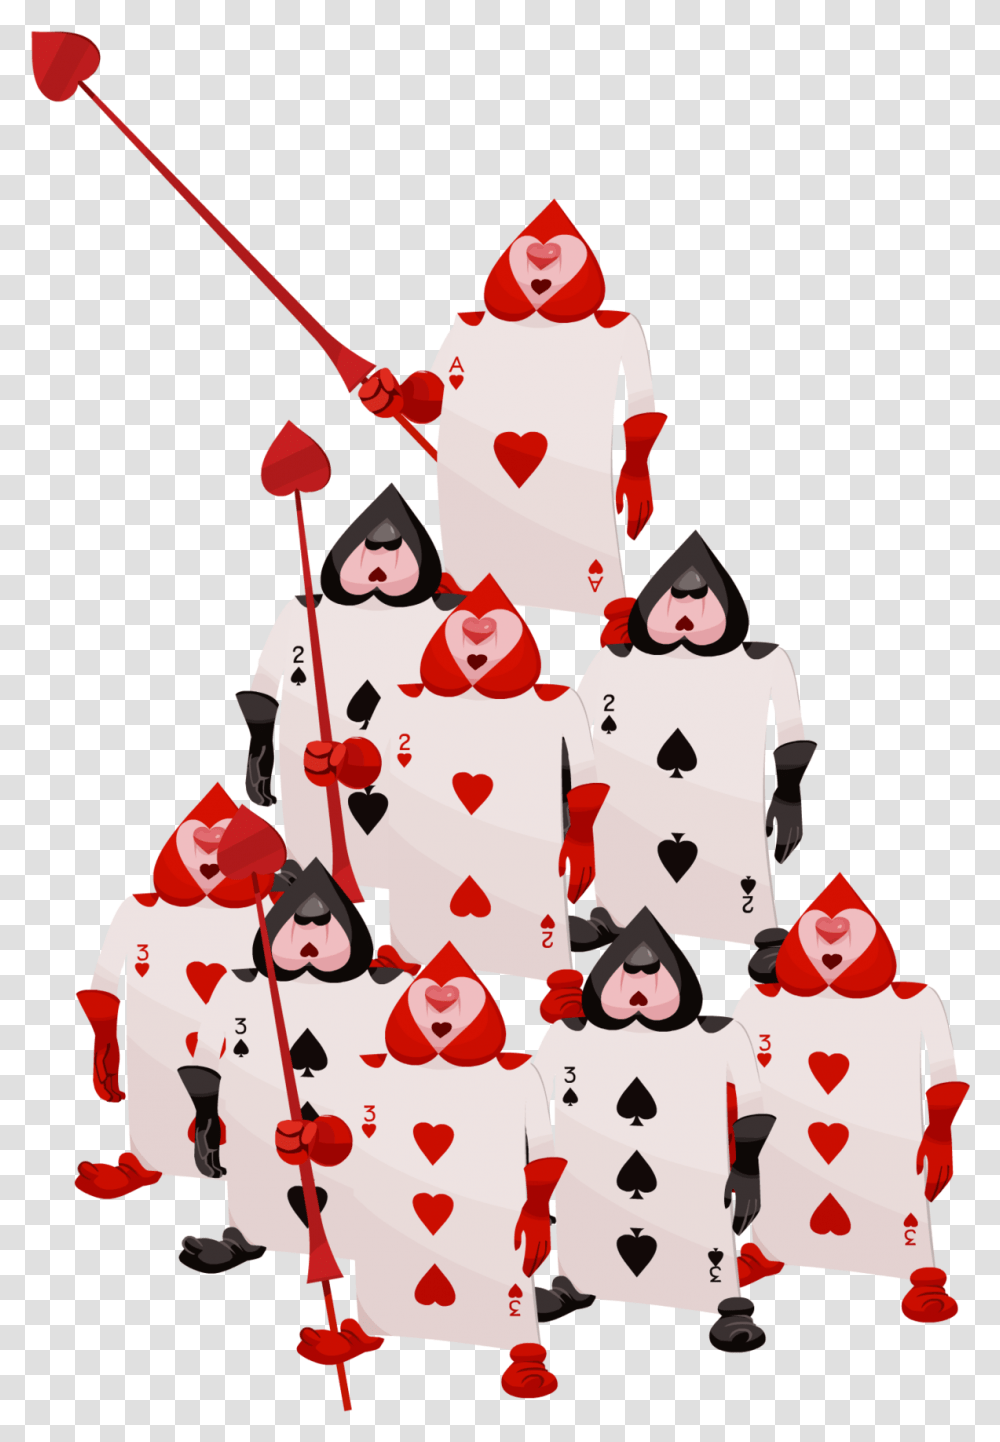 Playing Cards Kingdom Hearts Wiki The Kingdom Hearts Alice In Wonderland Card Soldiers, Snowman, Winter, Outdoors, Nature Transparent Png